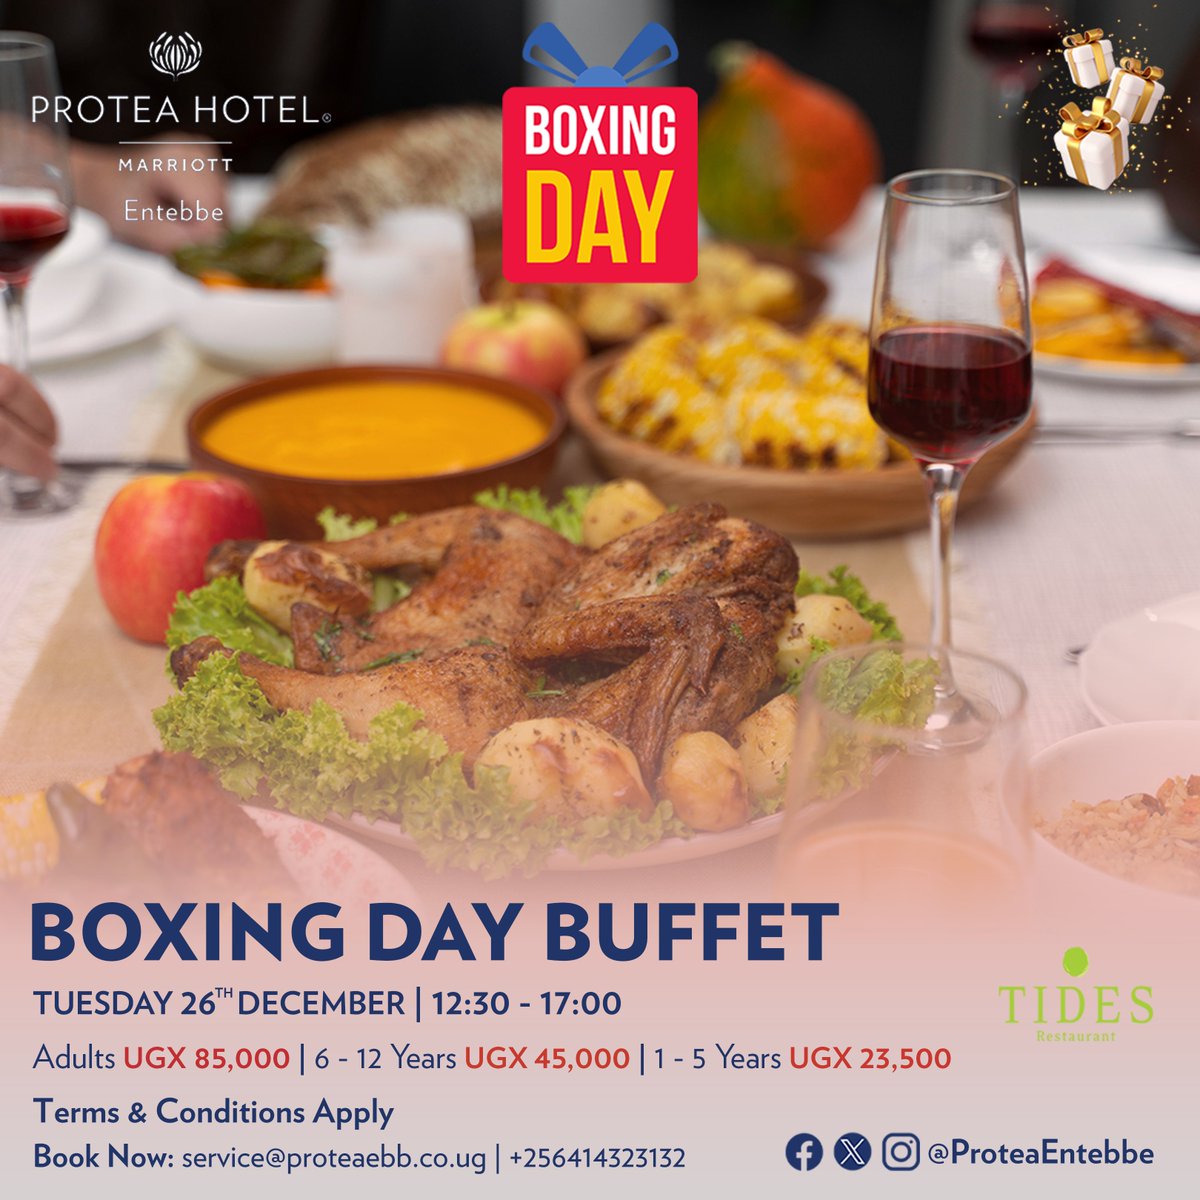 Extend the festive cheer! Indulge in our delectable Boxing Day Buffet, served with love from 12:30 pm to 5:00 pm. 

Let the feasting continue! 🍽✨

#FestiveFeast #BoxingDayBuffet